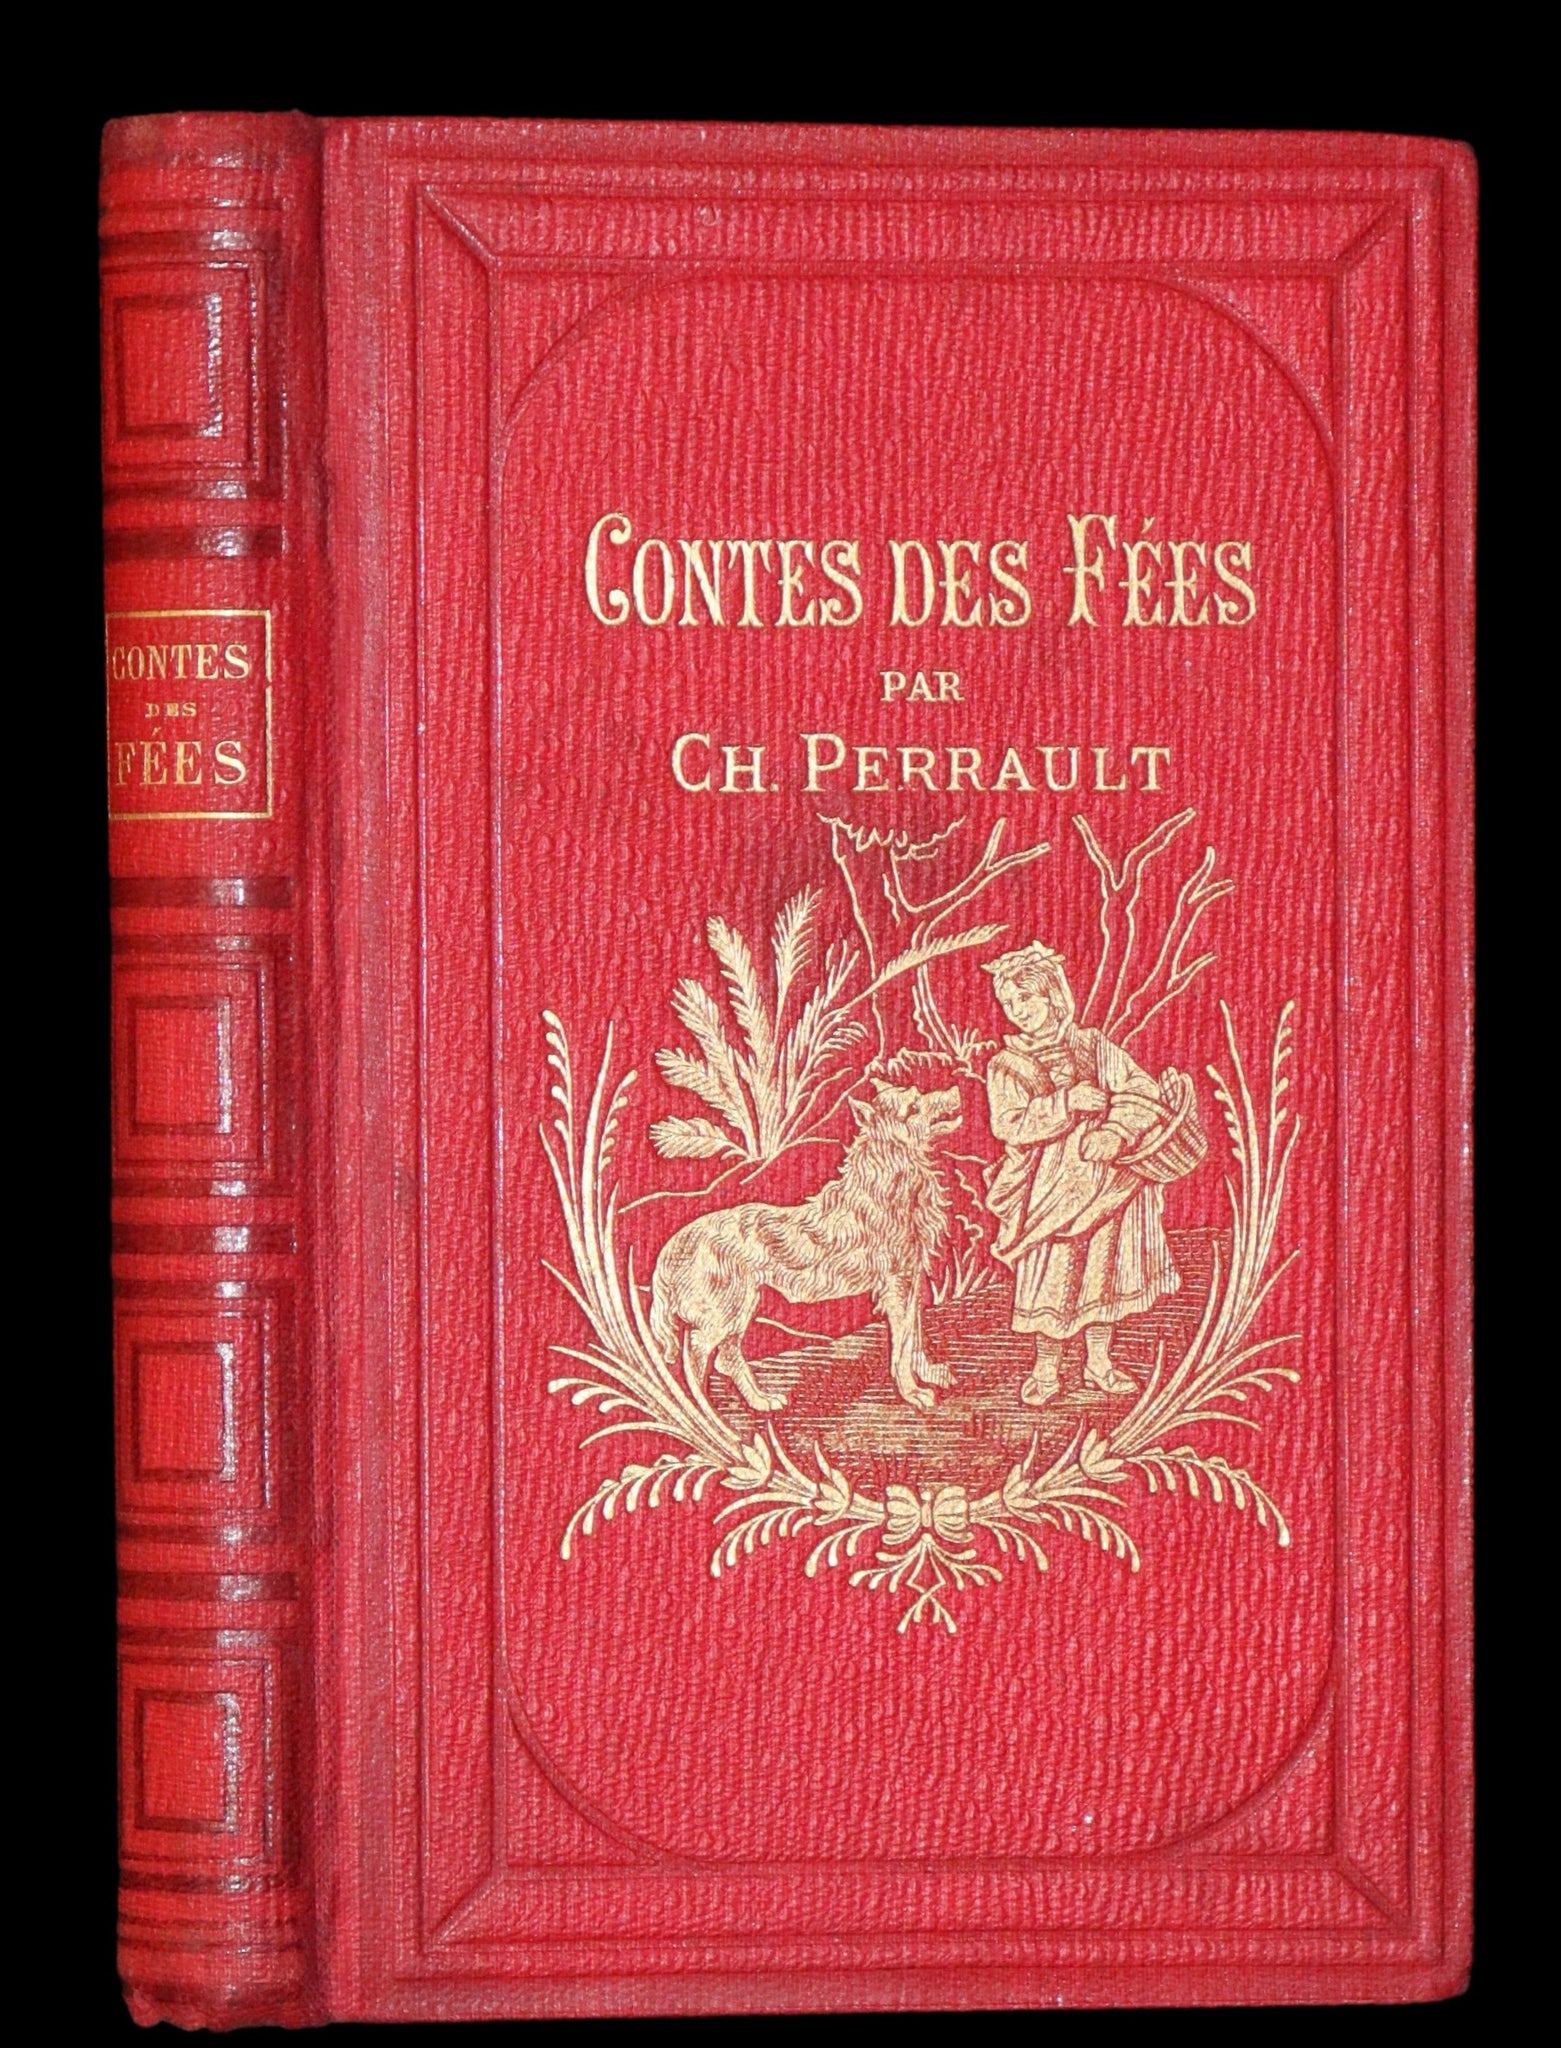 1880 Scarce illustrated French Book ~ Contes des Fees by Charles Perrault - Fairy Tales.